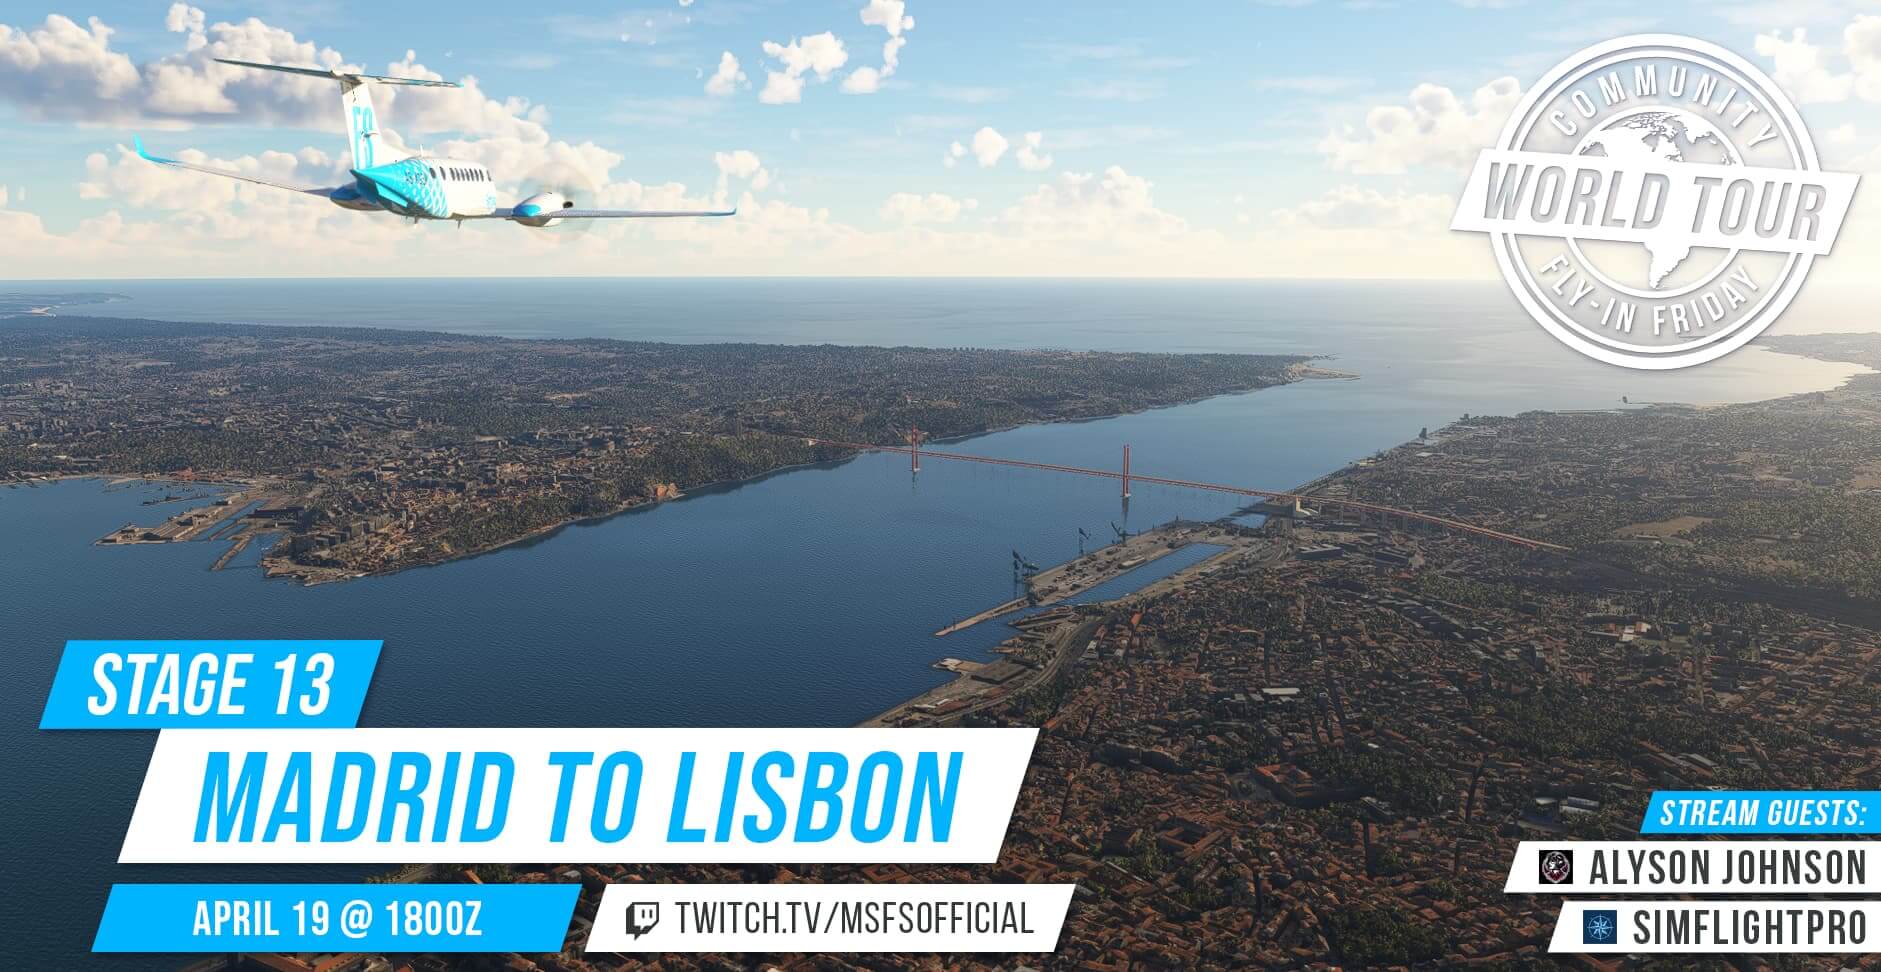 Community Fly-In Friday: World Tour Madrid to Lisbon. April 19th at 1800 UTC. twitch.tv/msfsofficial